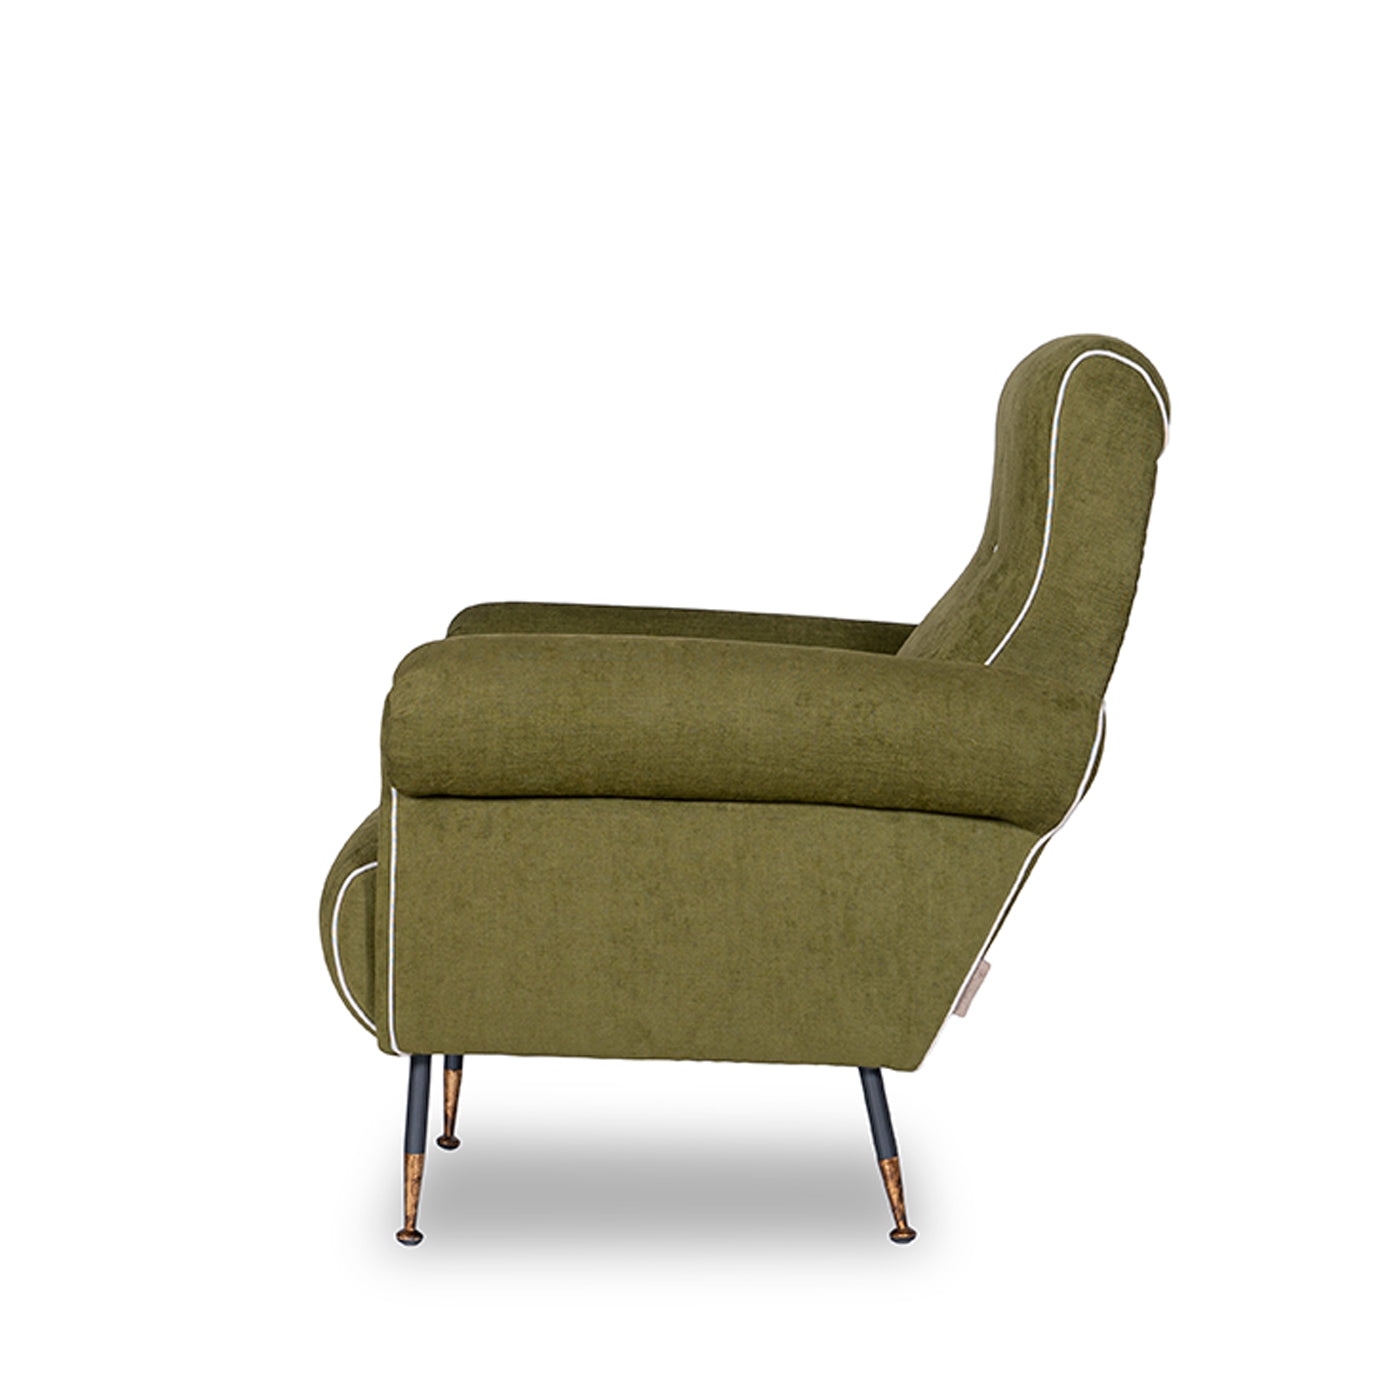 Pulce Armchair Tribeca Collection - Alternative view 5